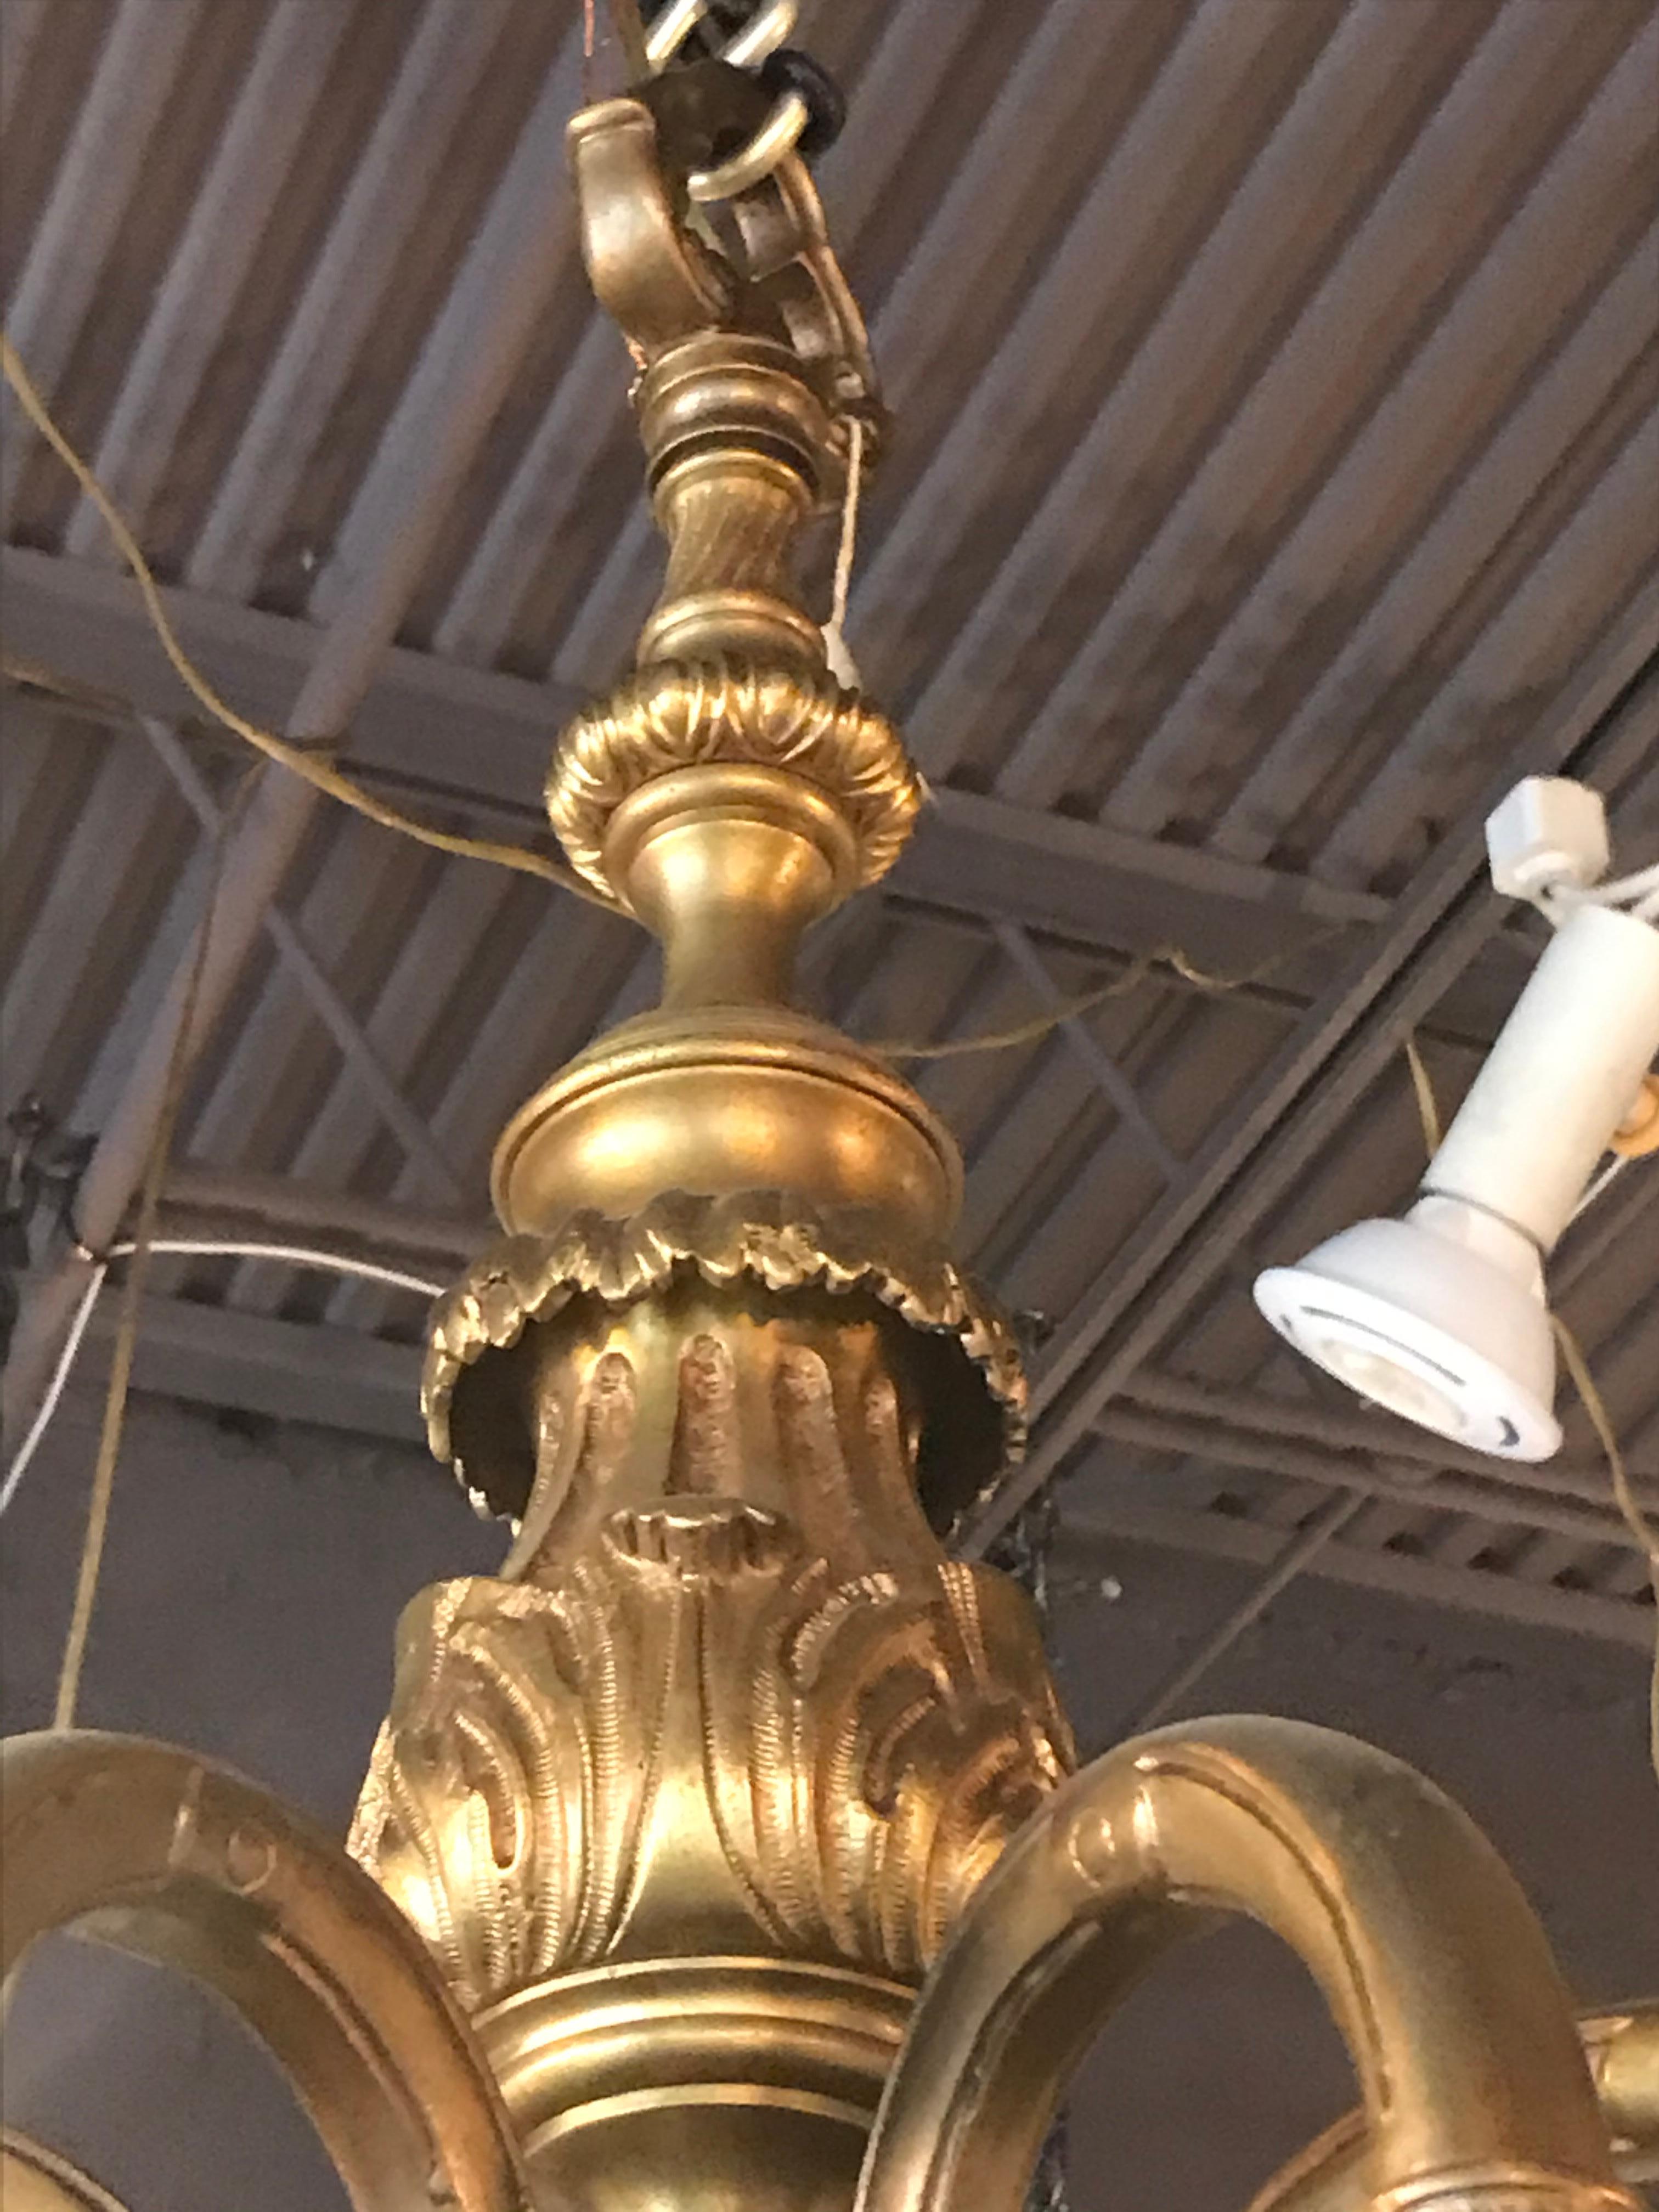 A fine gilt bronze French chandelier. 8-light. Very good detail and craftsmanship, France, circa 1930
Dimensions: 26 inches long x 29 inches diameter
CW2082.